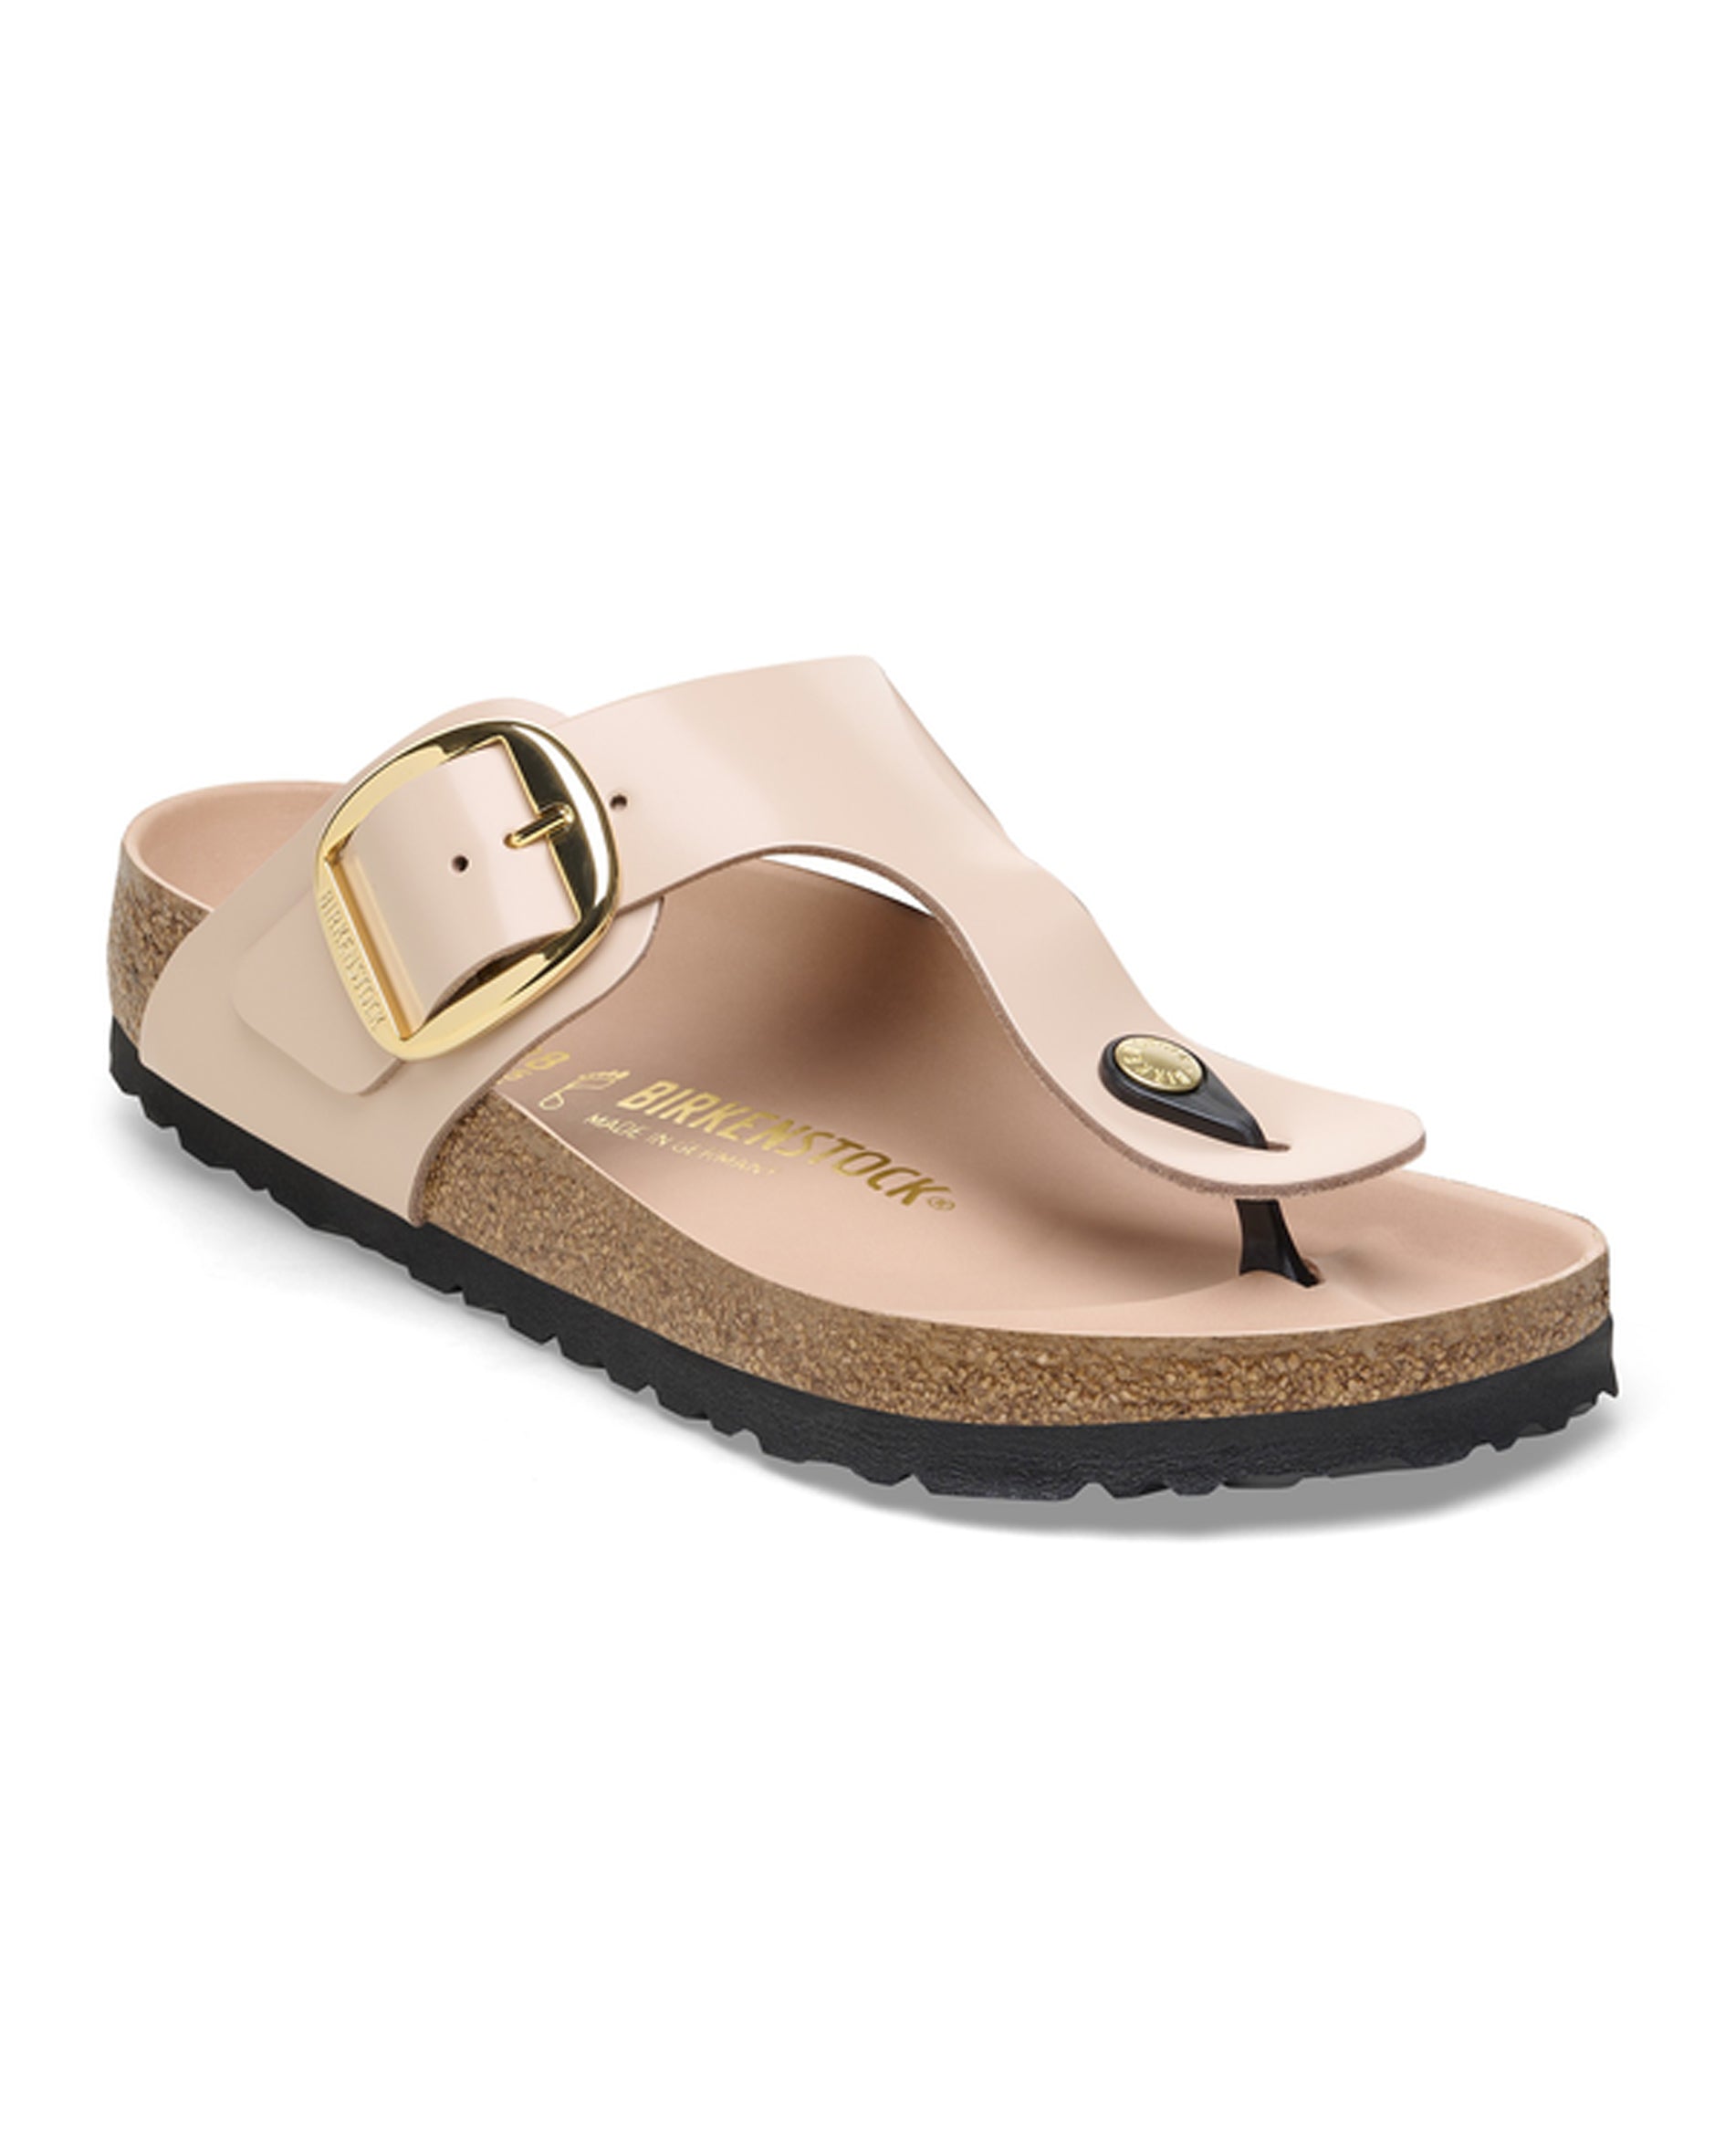 Gizeh Big Buckle High Shine New Beige Leather Sandals